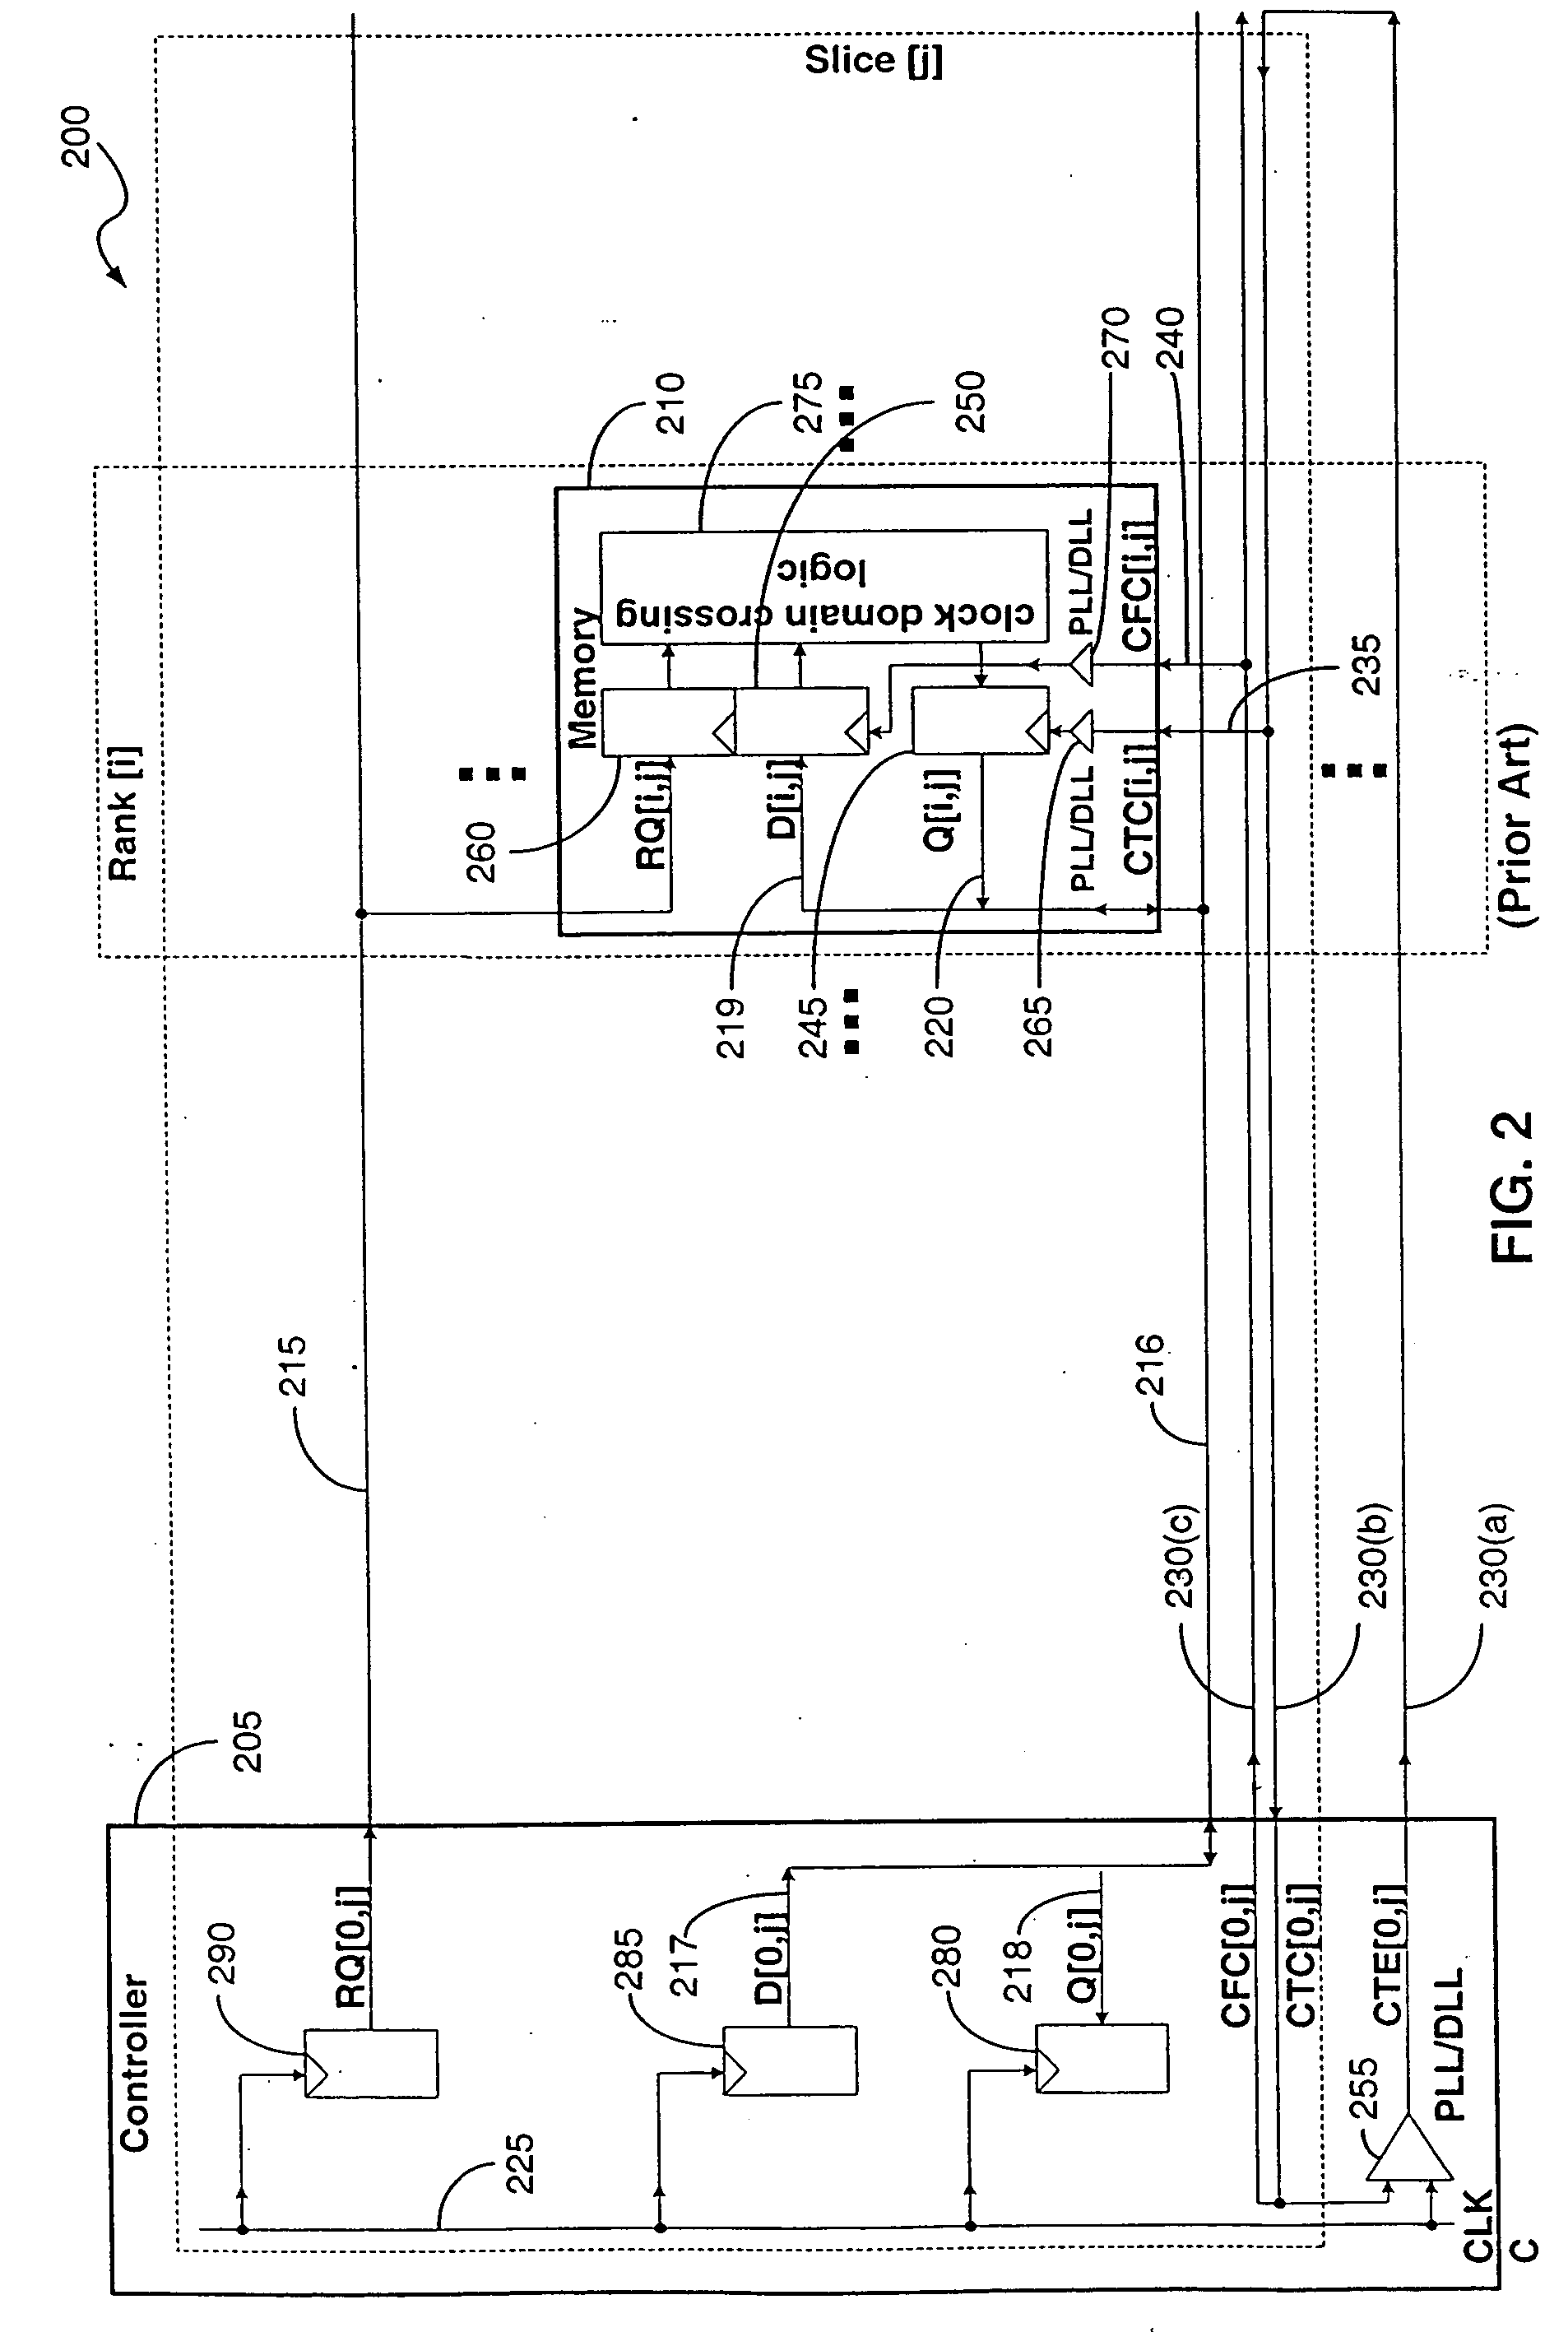 Memory device signaling system and method with independent timing calibration for parallel signal paths